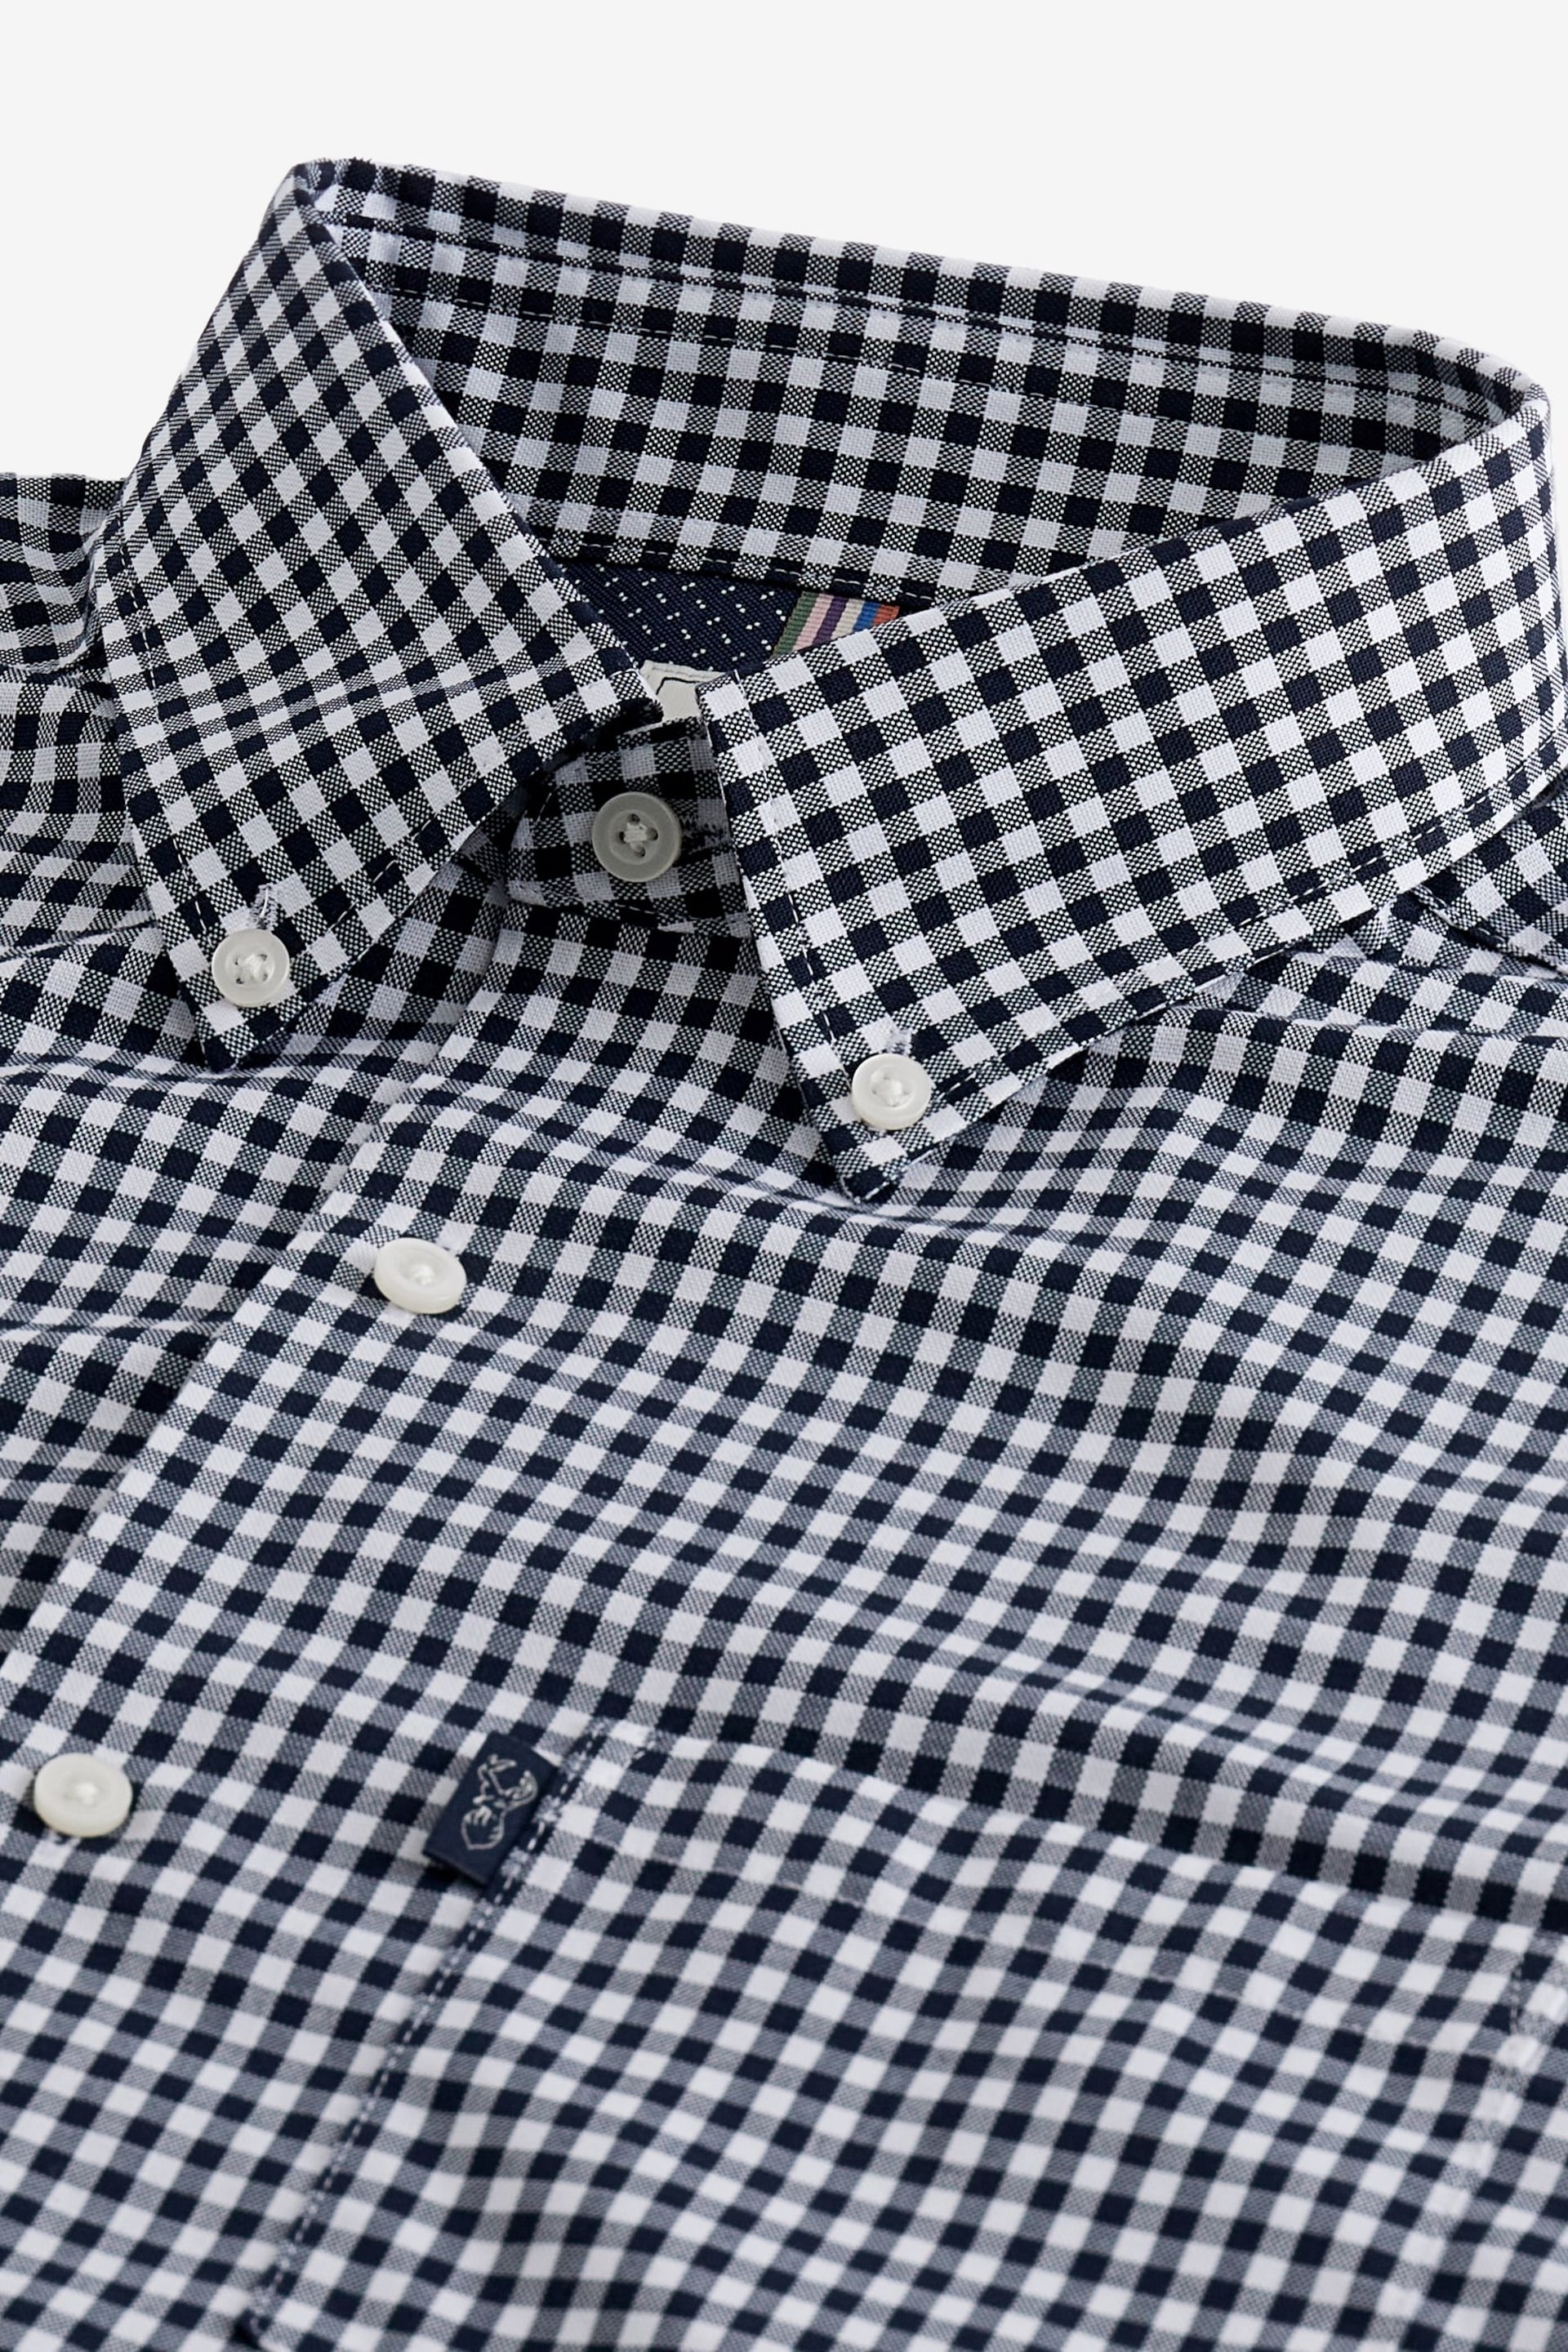 Navy Blue Gingham Easy Iron Button Down Oxford Shirt - Image 6 of 7